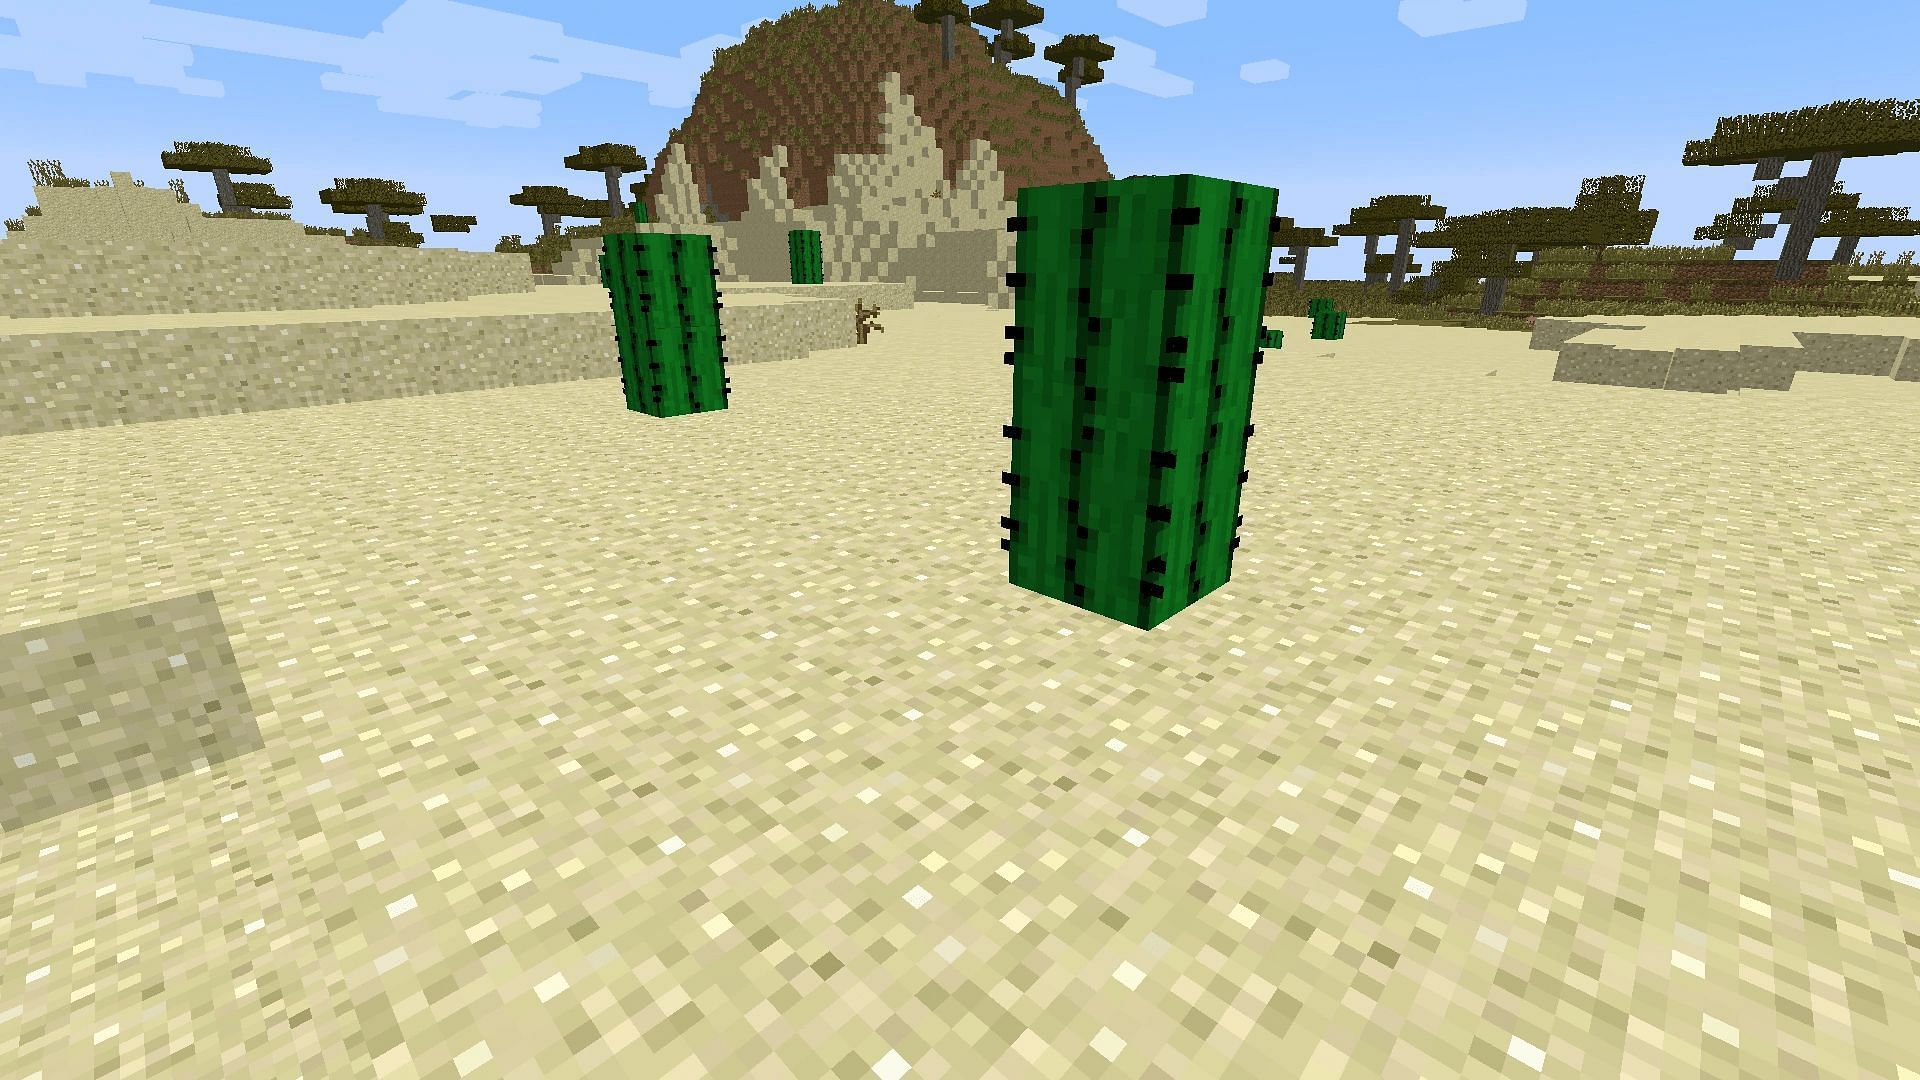 Cacti only make sense to be the natural food source for camels in Minecraft (Image via Mojang)